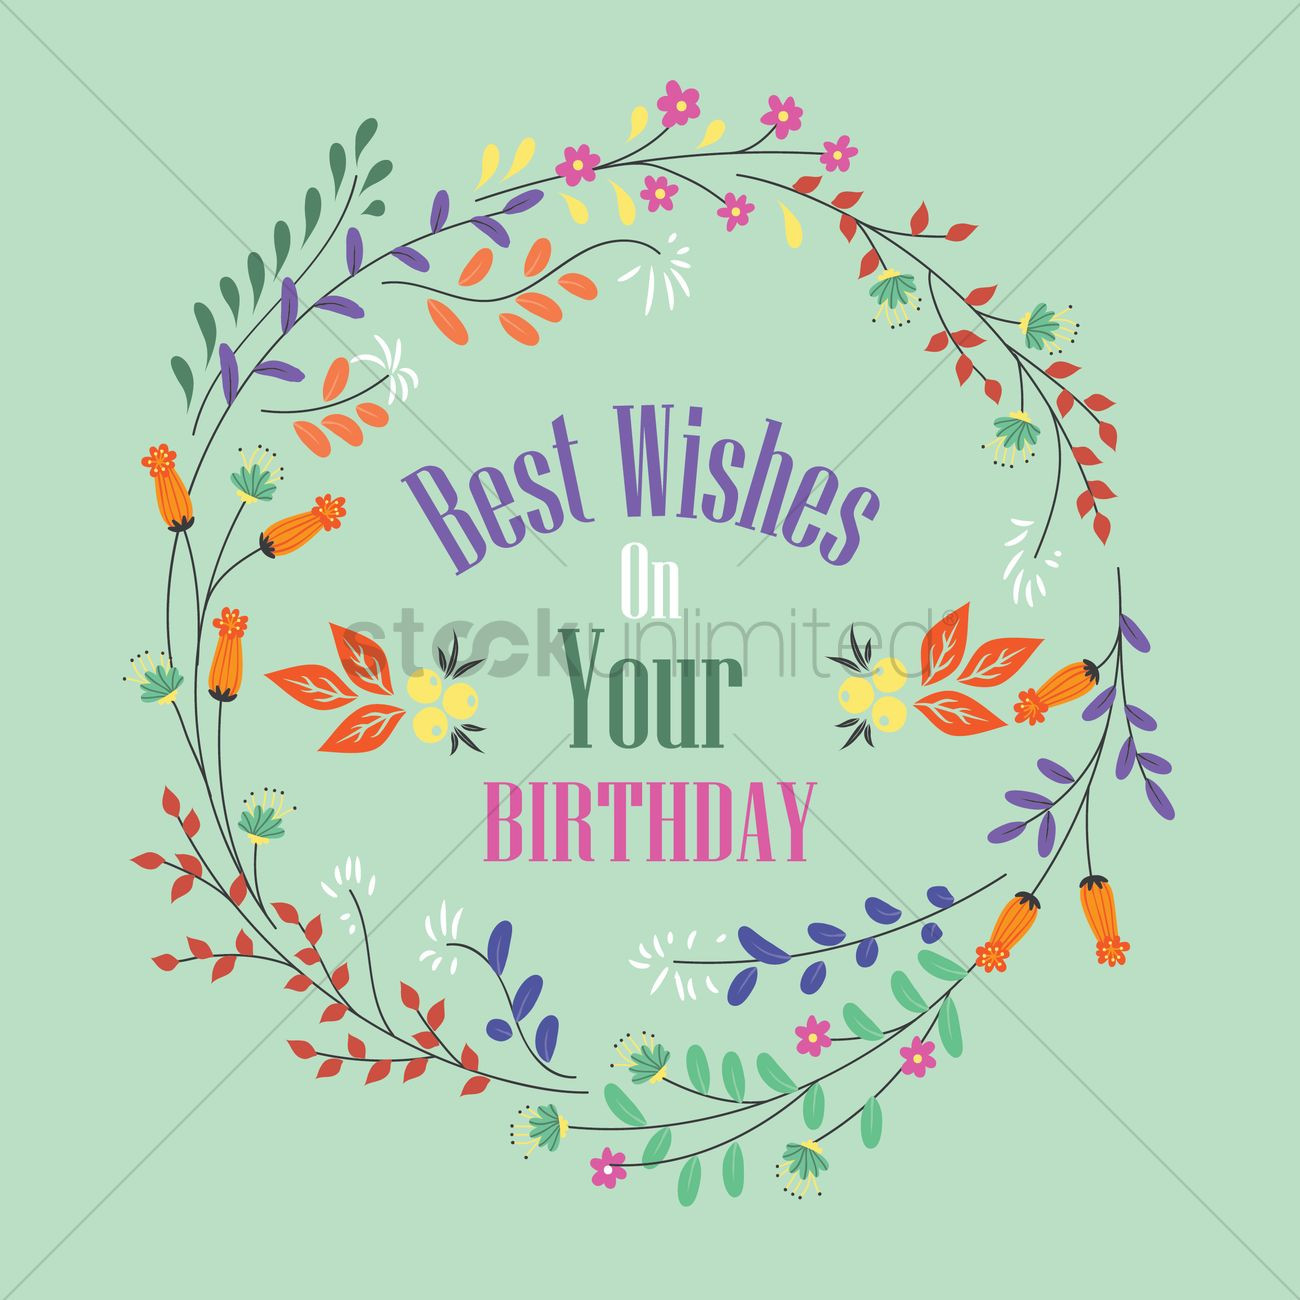 Best Wishes For Your Birthday
 Best wishes on your birthday label Vector Image